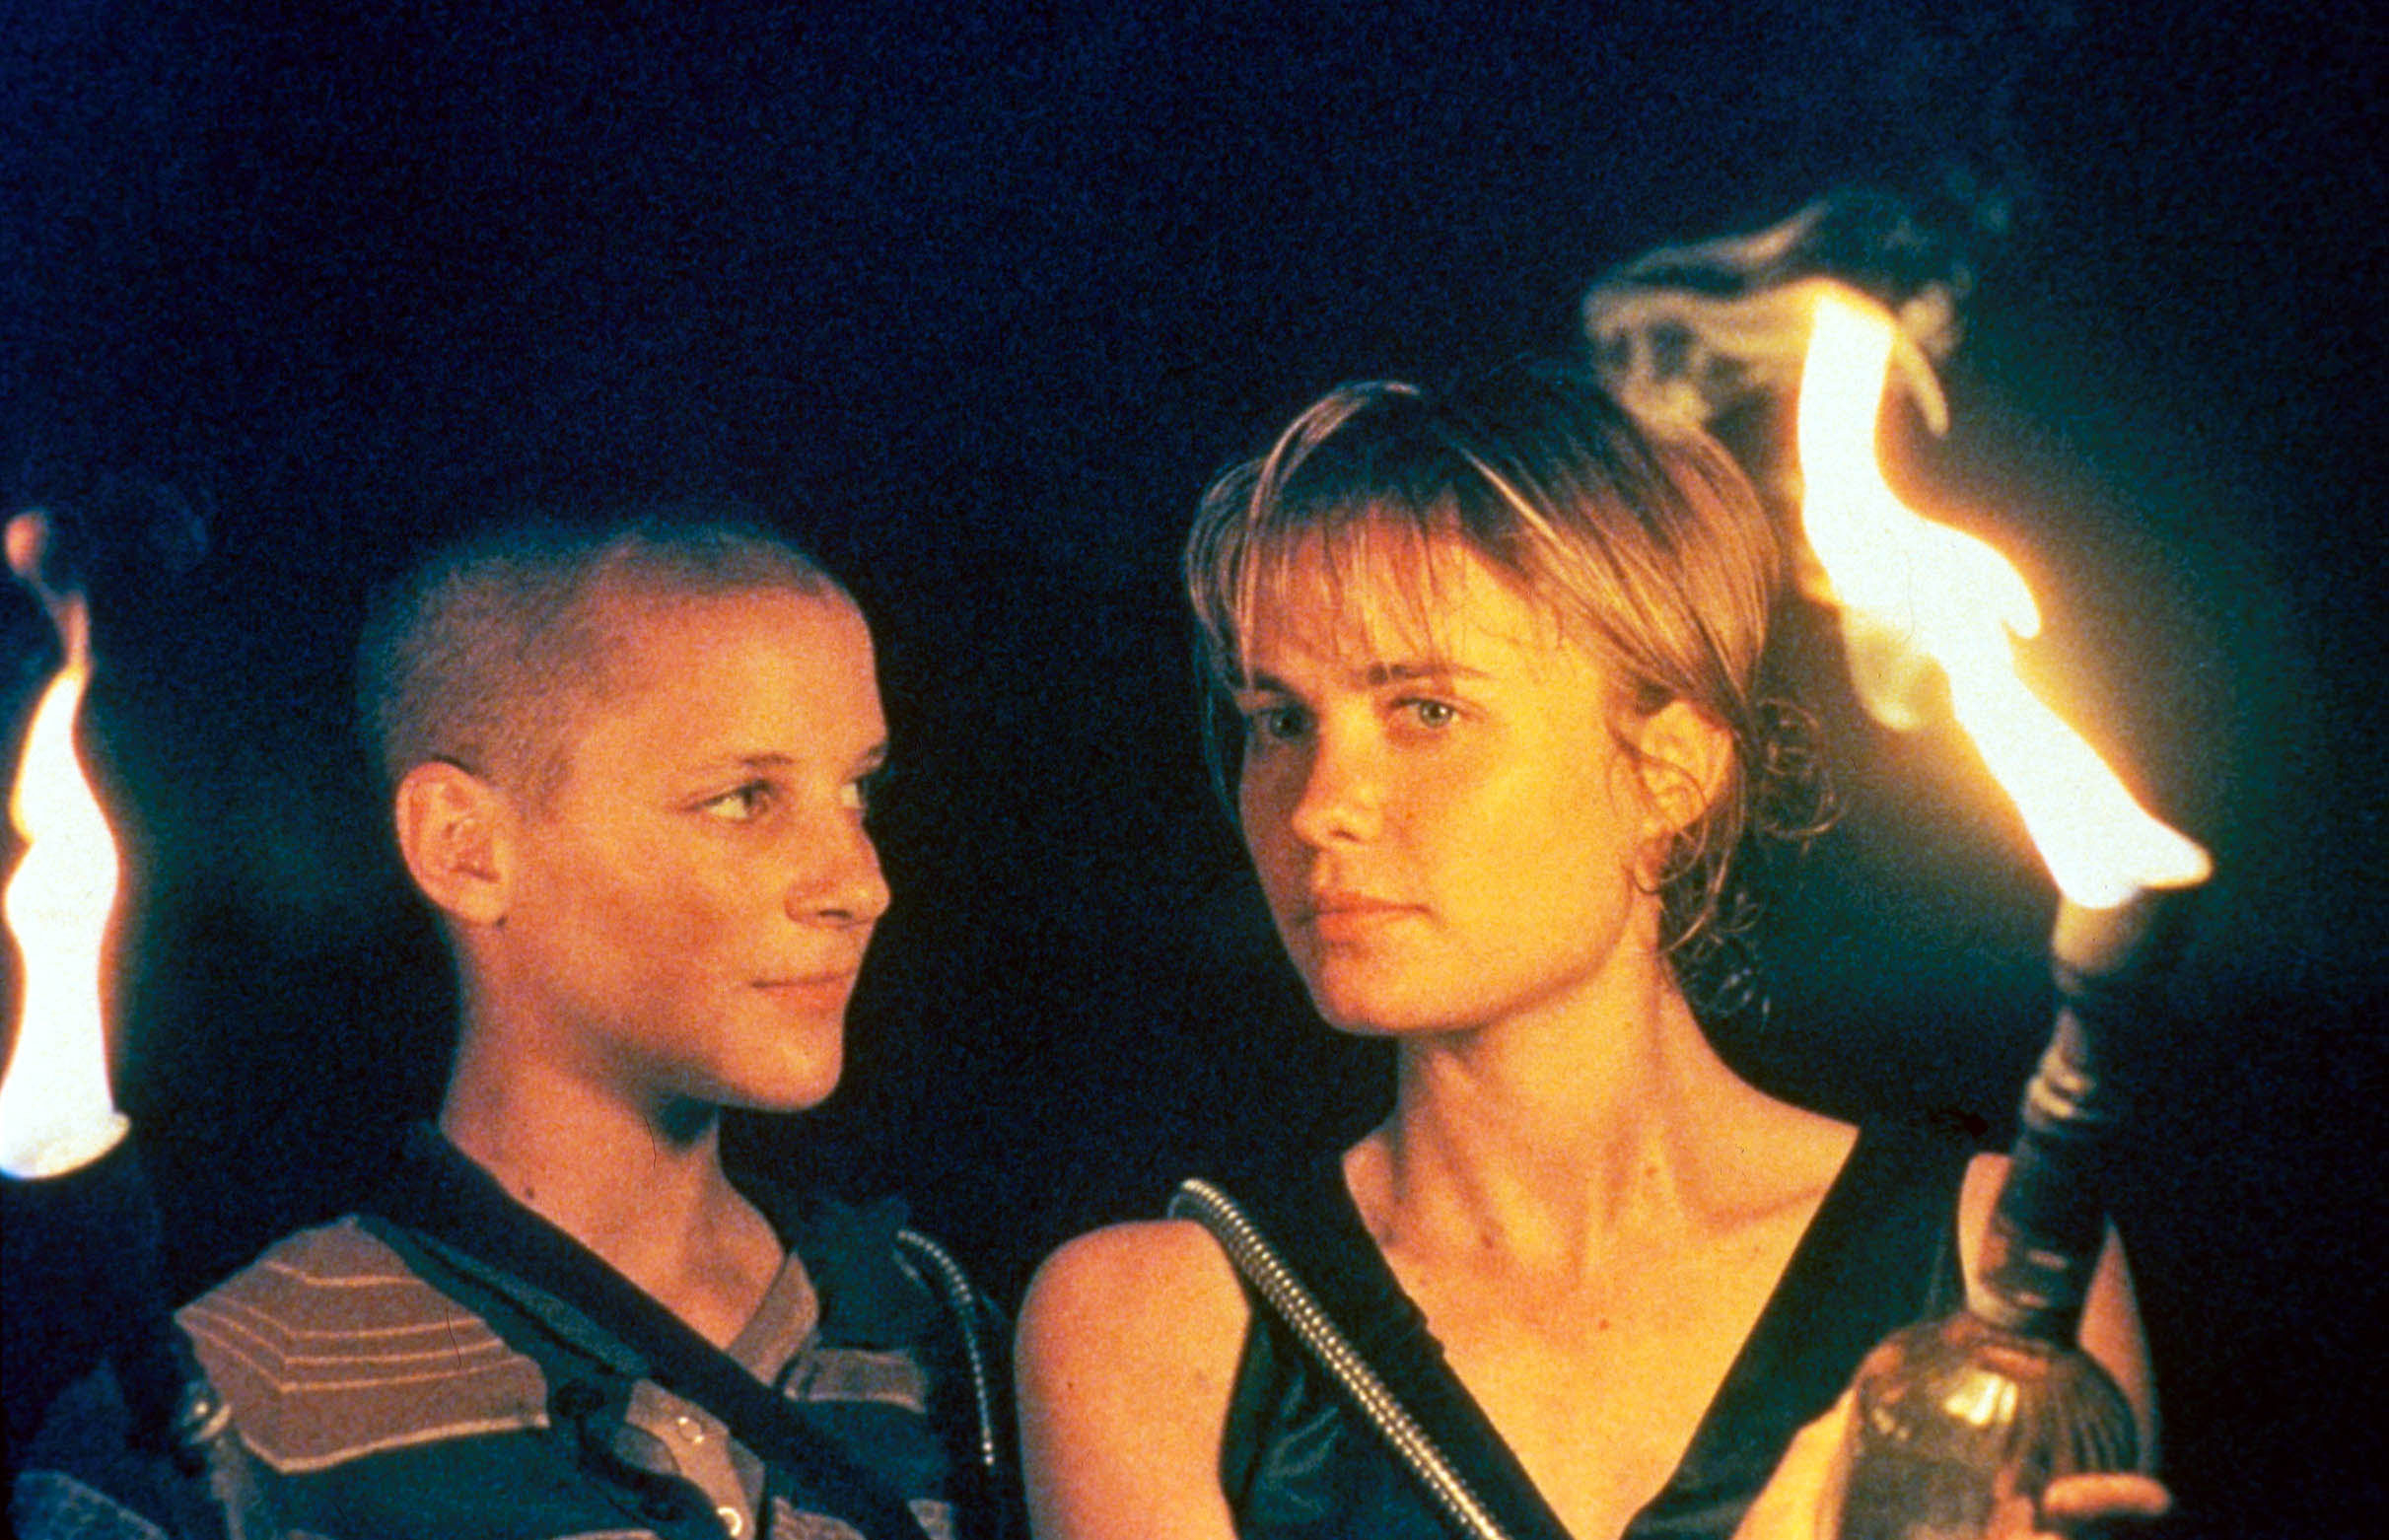 Rhiana Griffith and Radha Mitchell are illuminated by lit torches